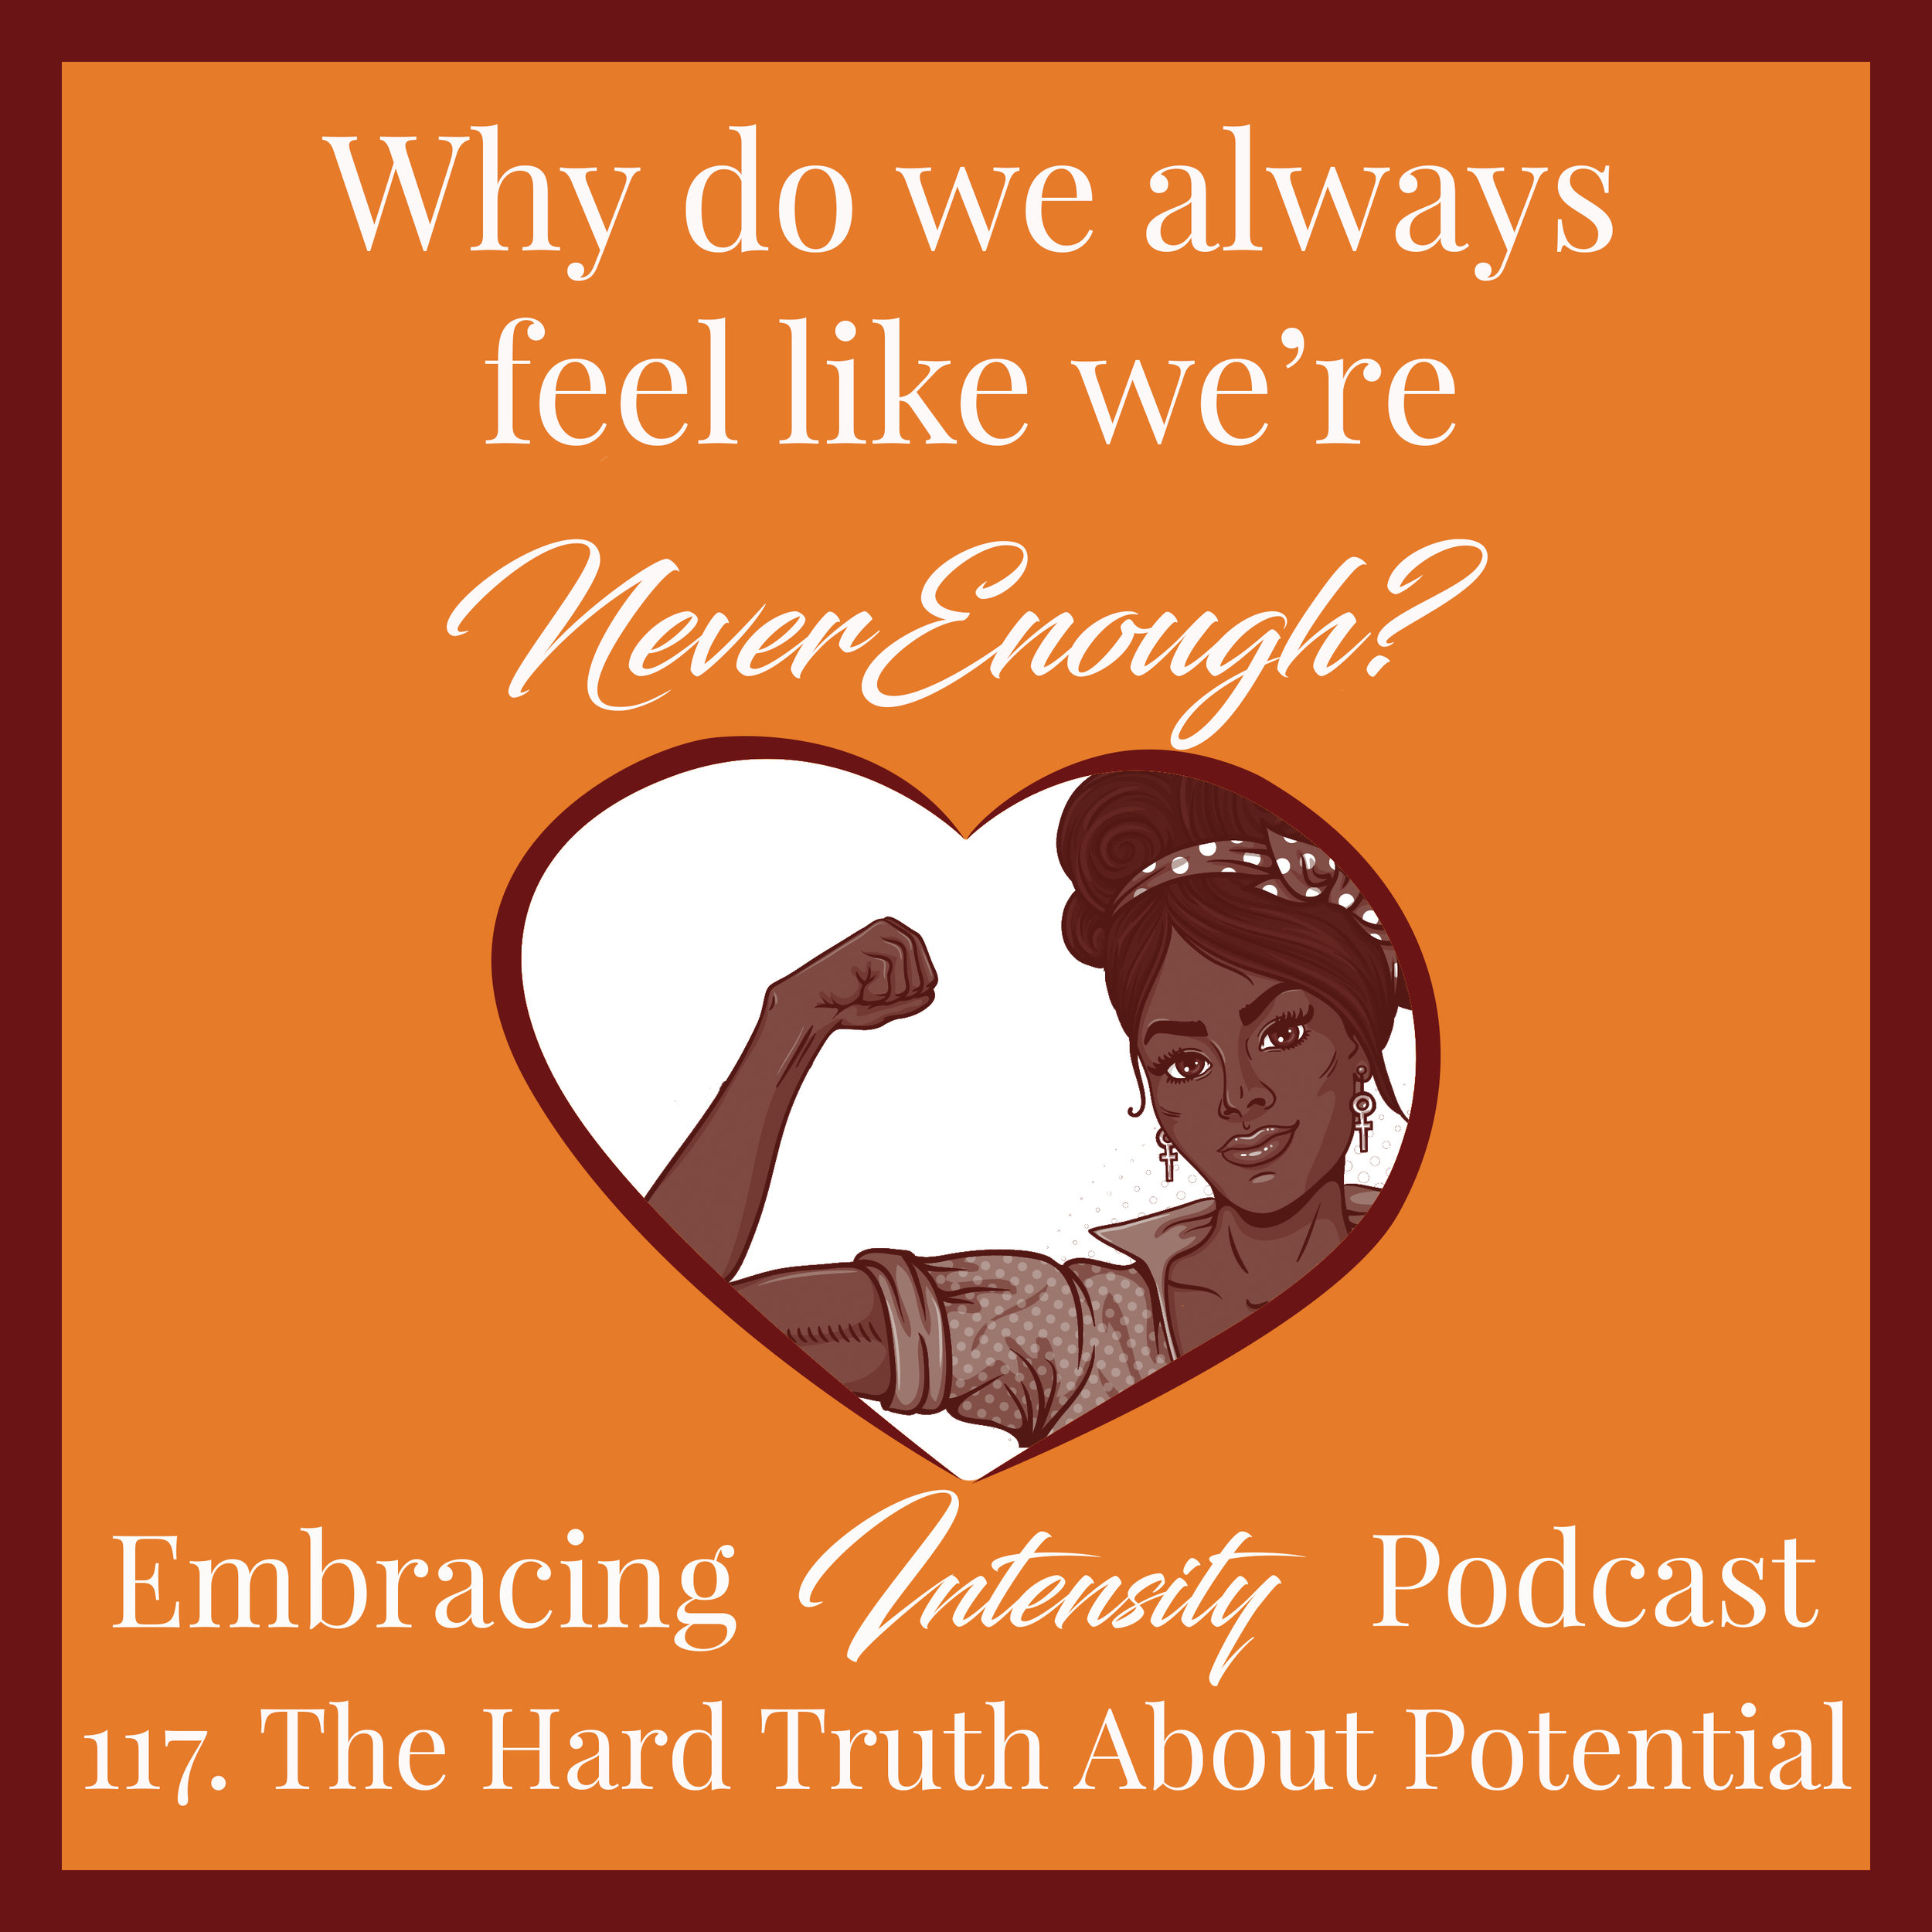 The hard truth about potential - why we always feel like we are "never enough"